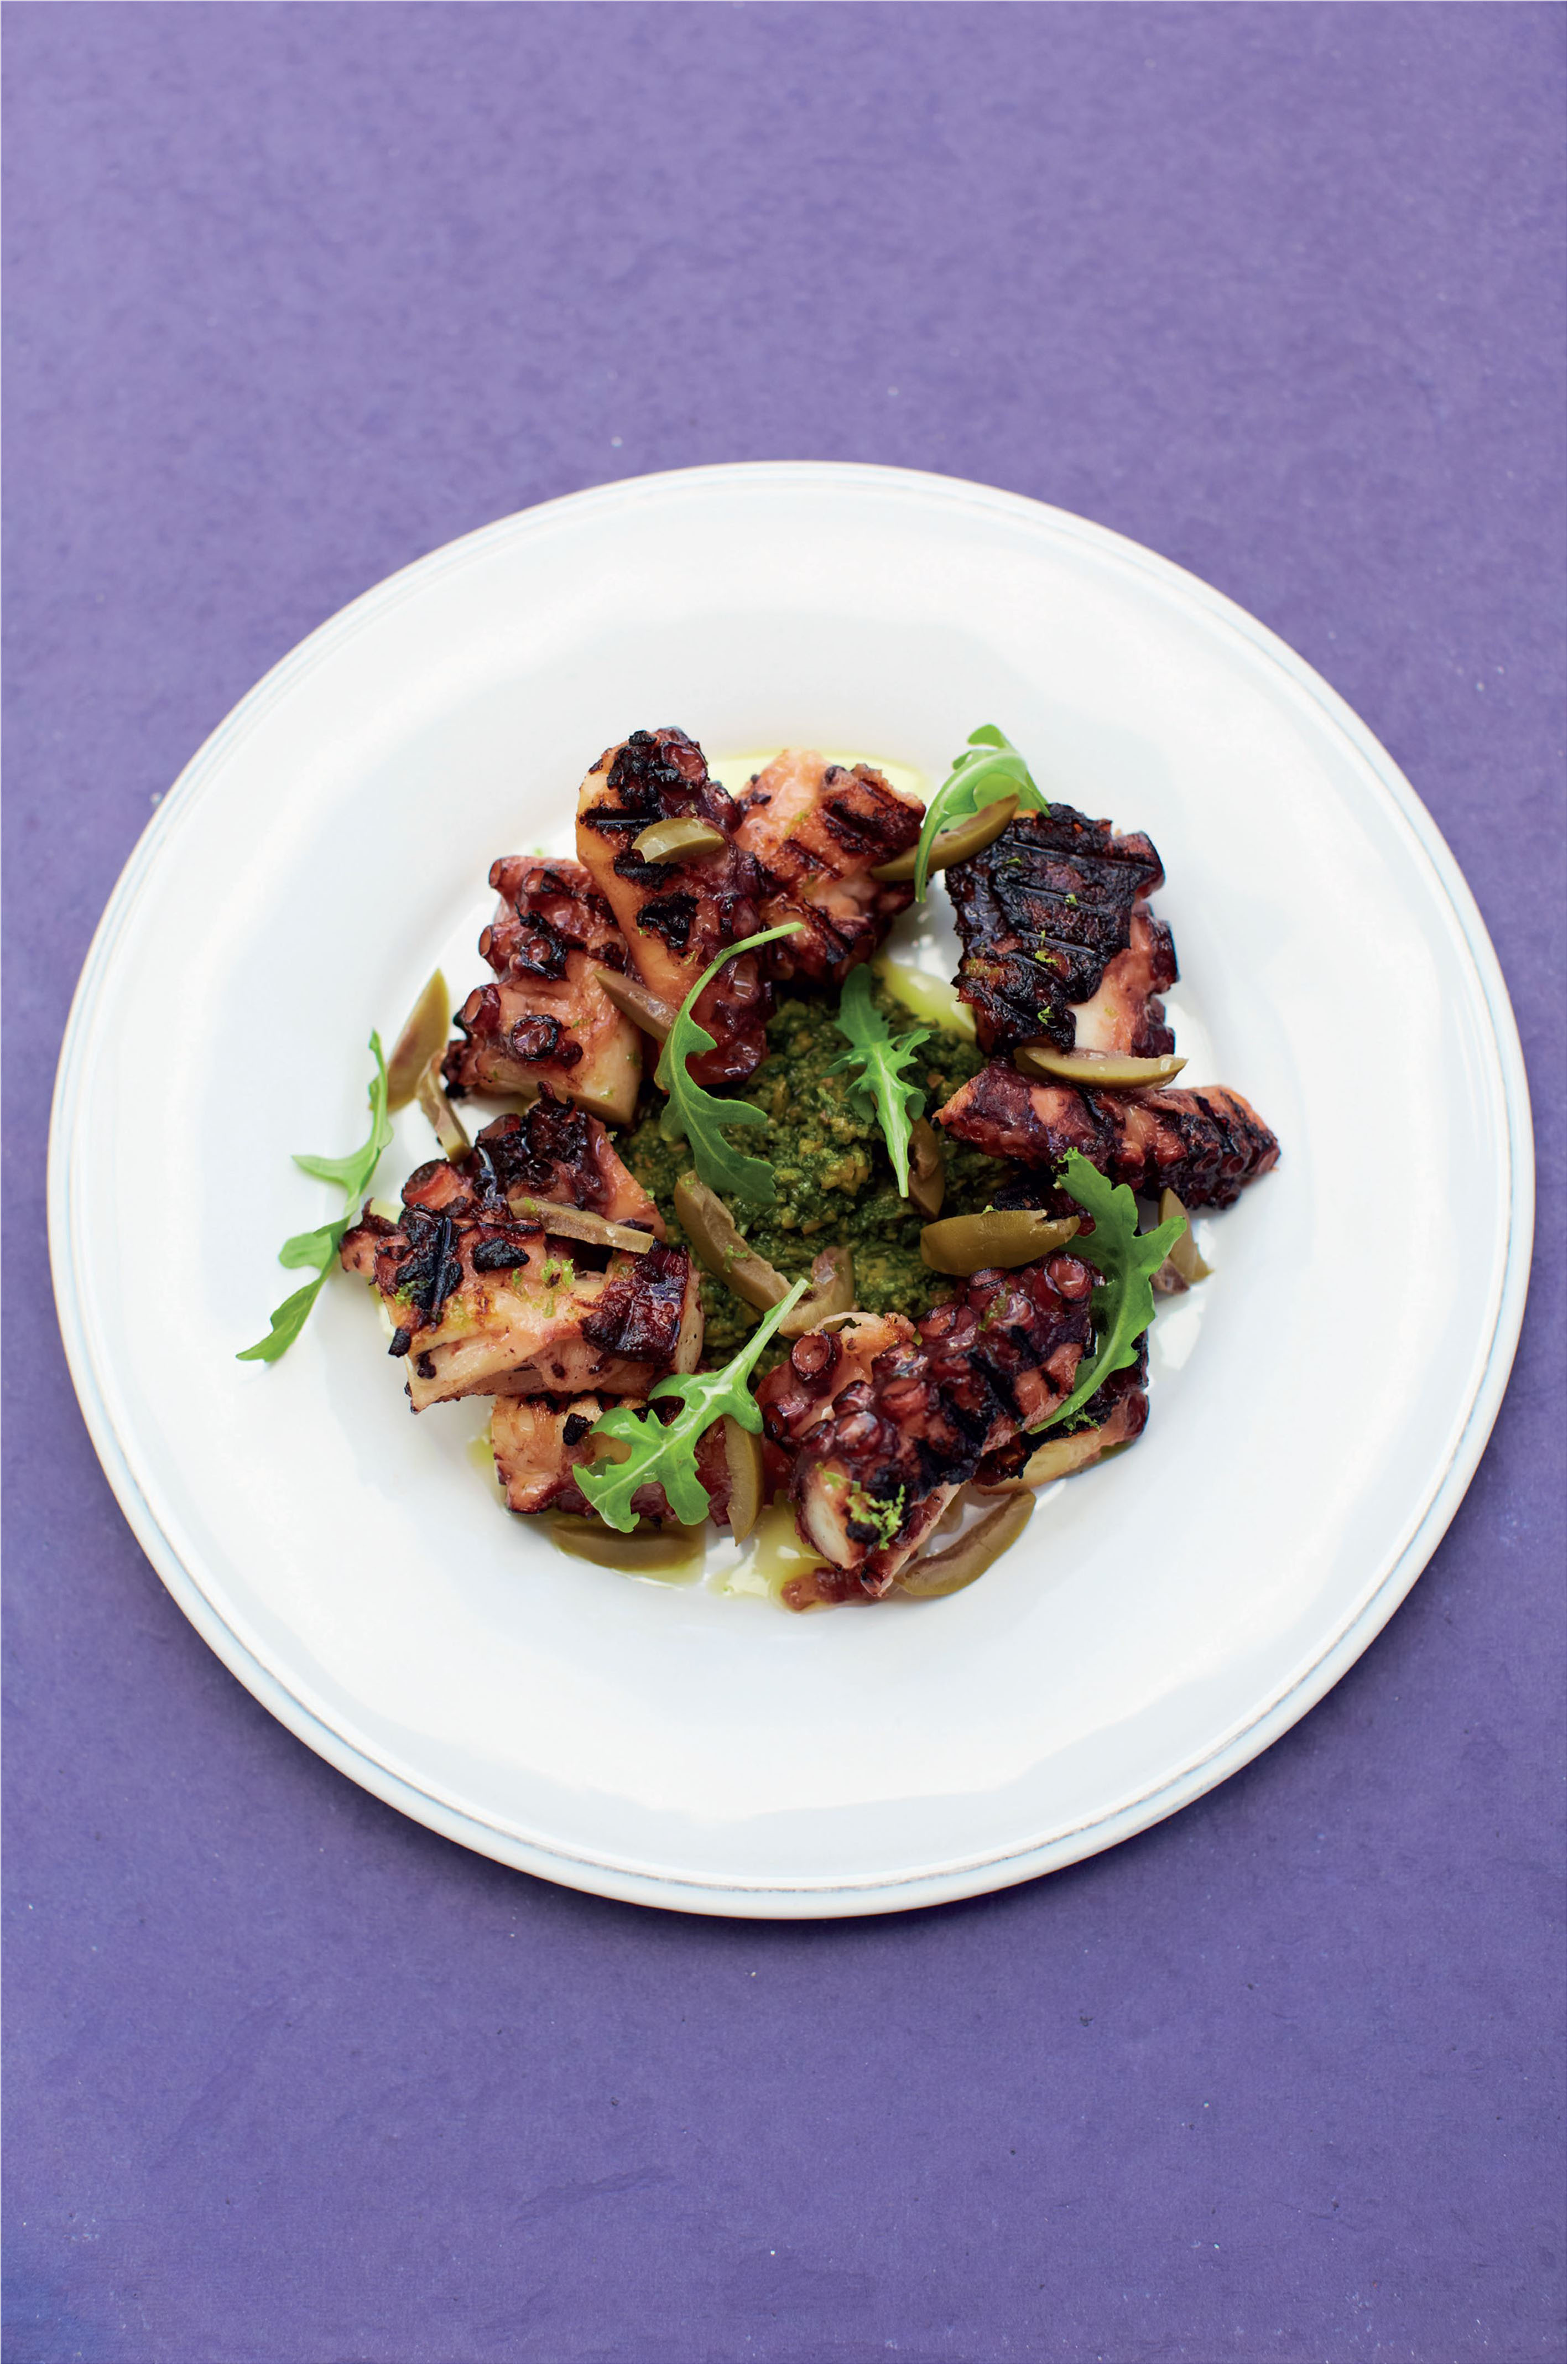 Braised octopus with lime, olive and rocket dressing